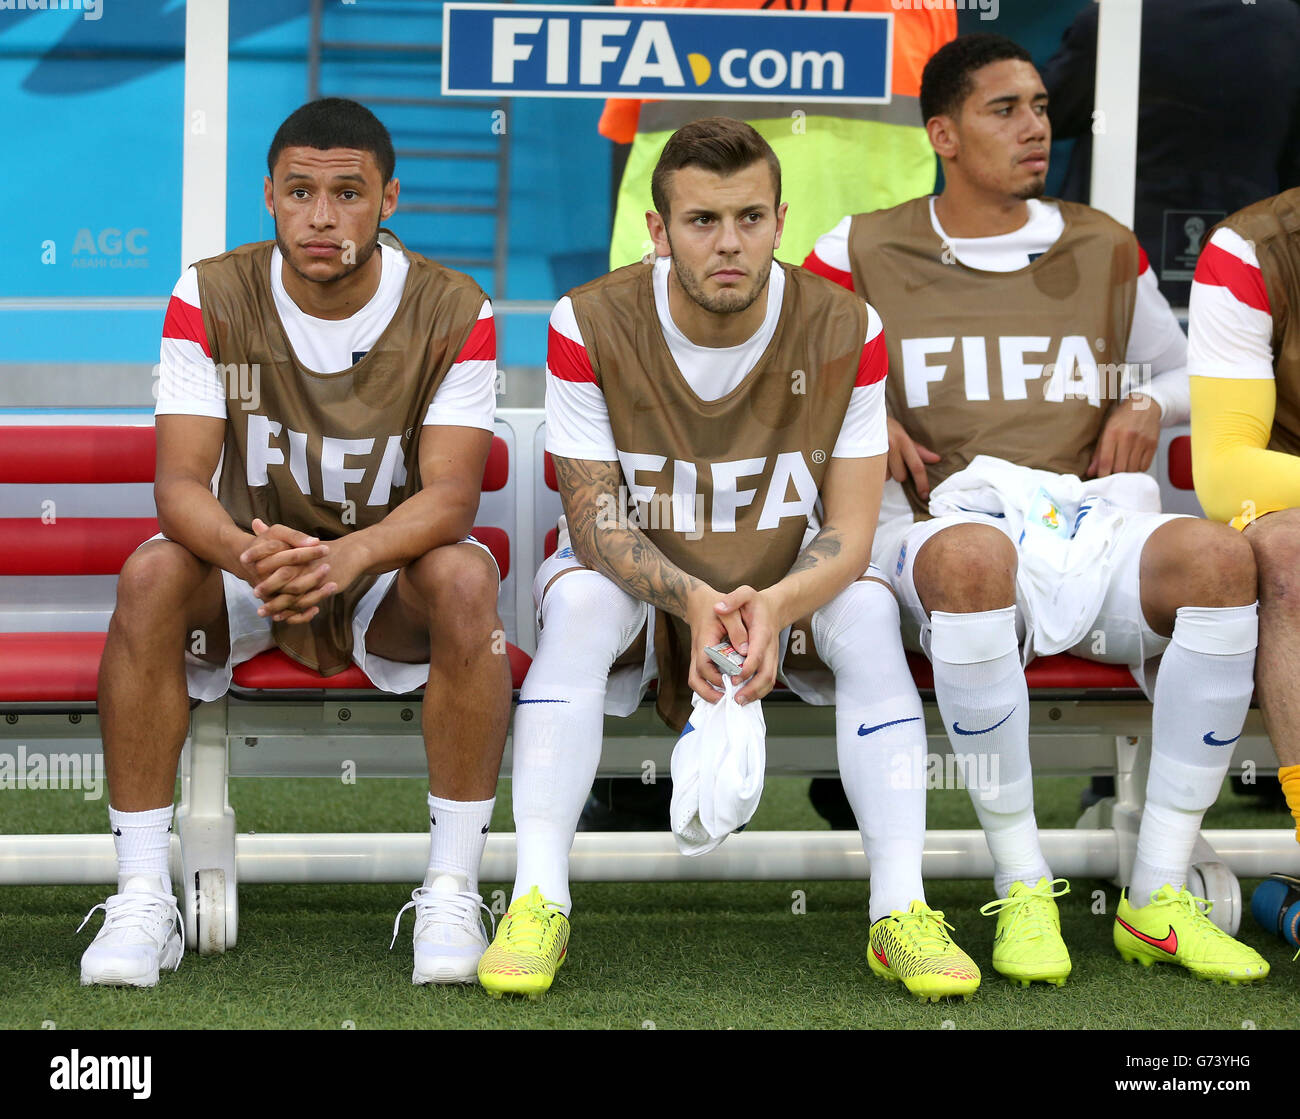 England's Jack Wilshere (centre), England's Alex Oxlade-Chamberlain (left) and England's Chris Smalling in the dugout during the FIFA World Cup, Group D match at the Arena da Amazonia, Manaus, Brazil. Stock Photo